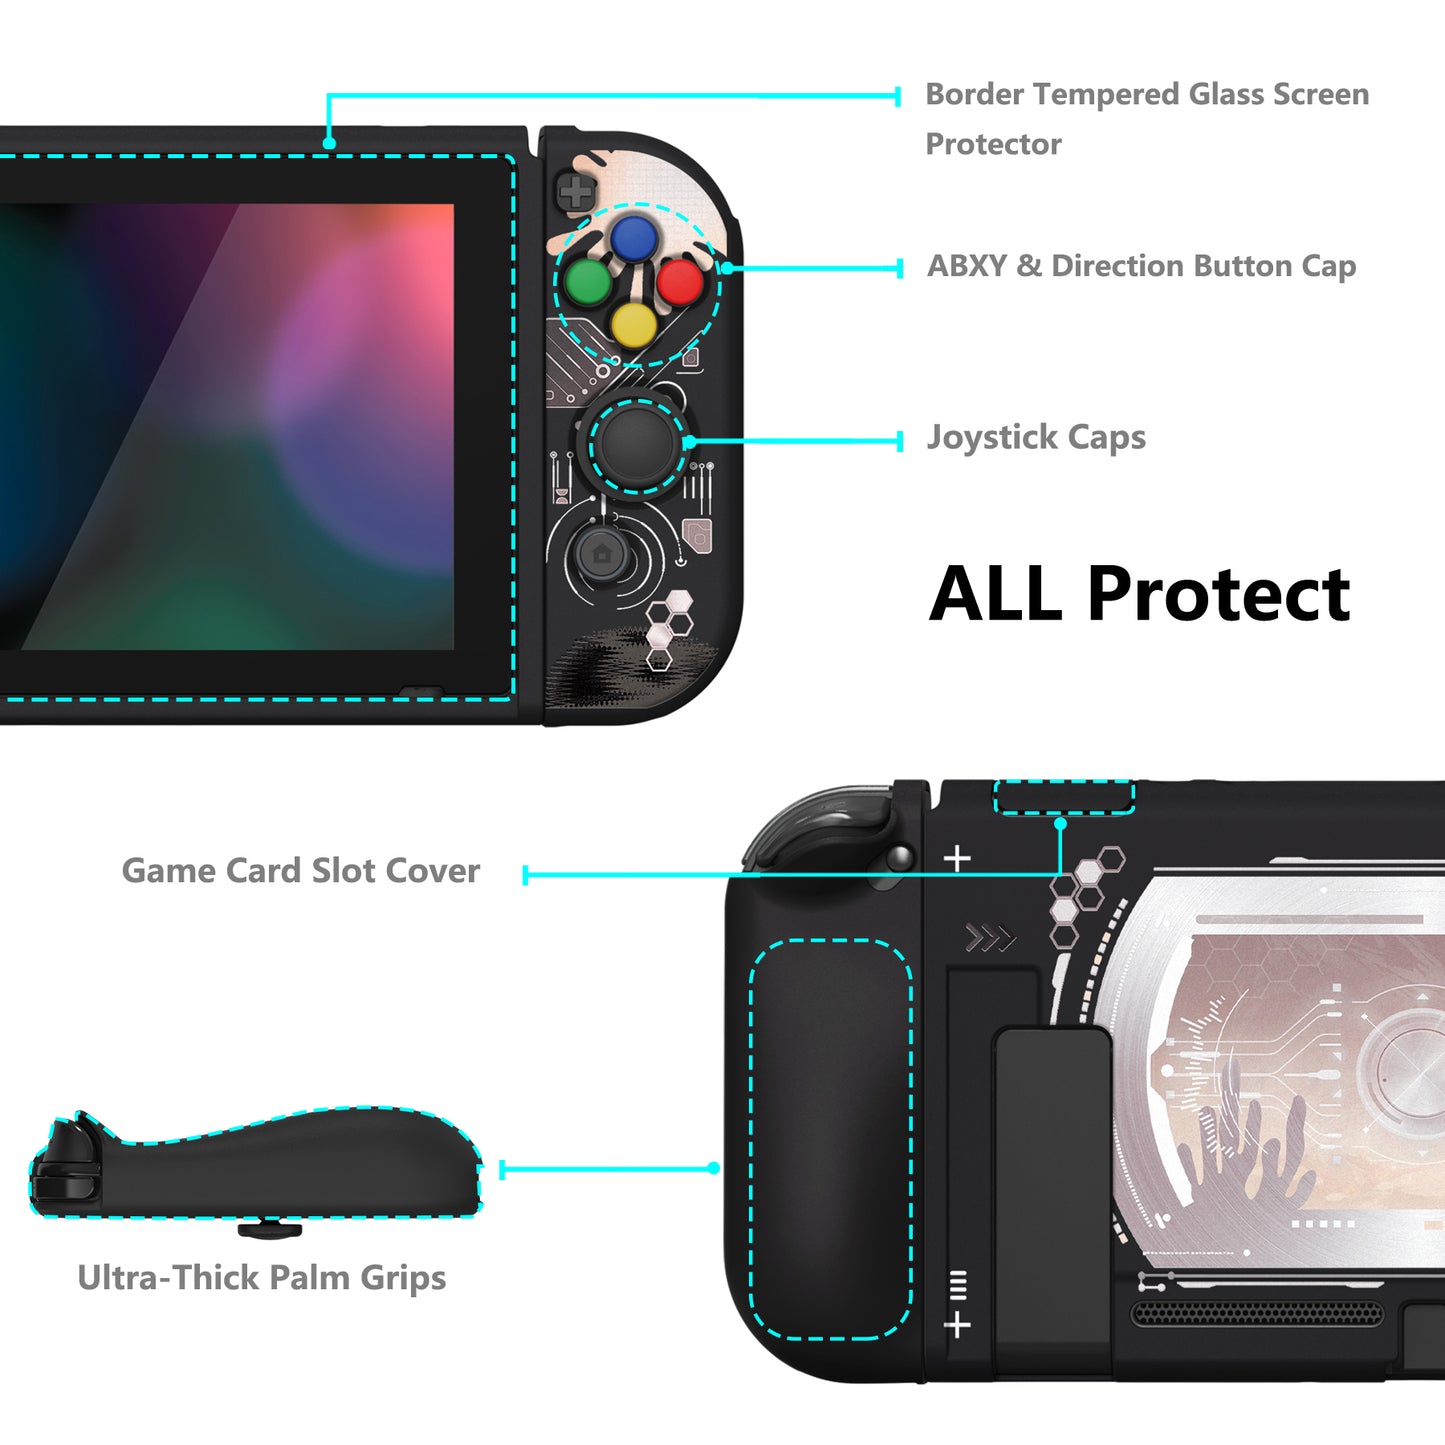 PlayVital ZealProtect Soft Protective Case for Nintendo Switch, Flexible Cover for Switch with Tempered Glass Screen Protector & Thumb Grips & ABXY Direction Button Caps - Silver Splatter - RNSYV6053 playvital